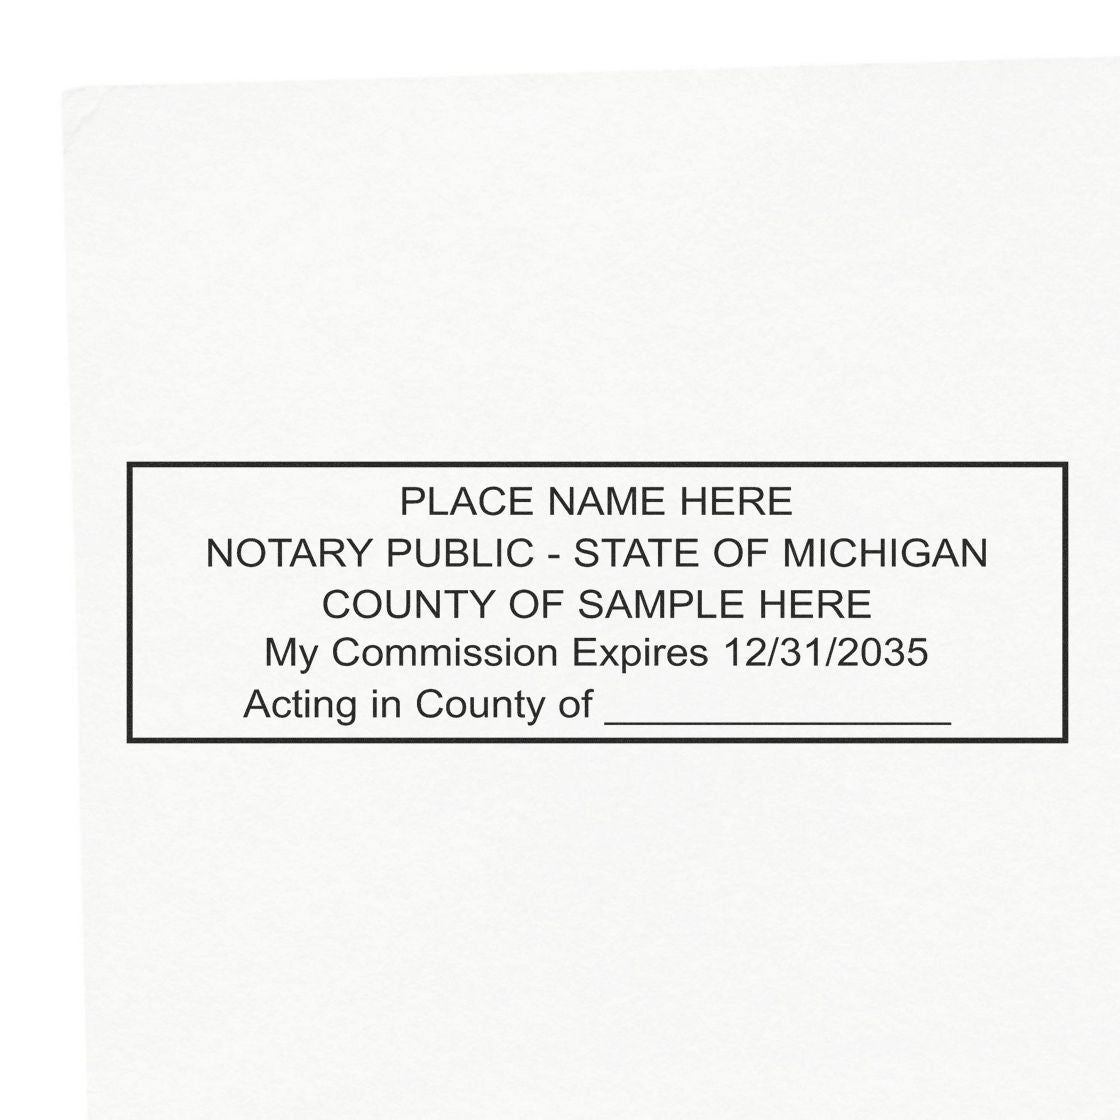 A stamped impression of the Slim Pre-Inked State Seal Notary Stamp for Michigan in this stylish lifestyle photo, setting the tone for a unique and personalized product.